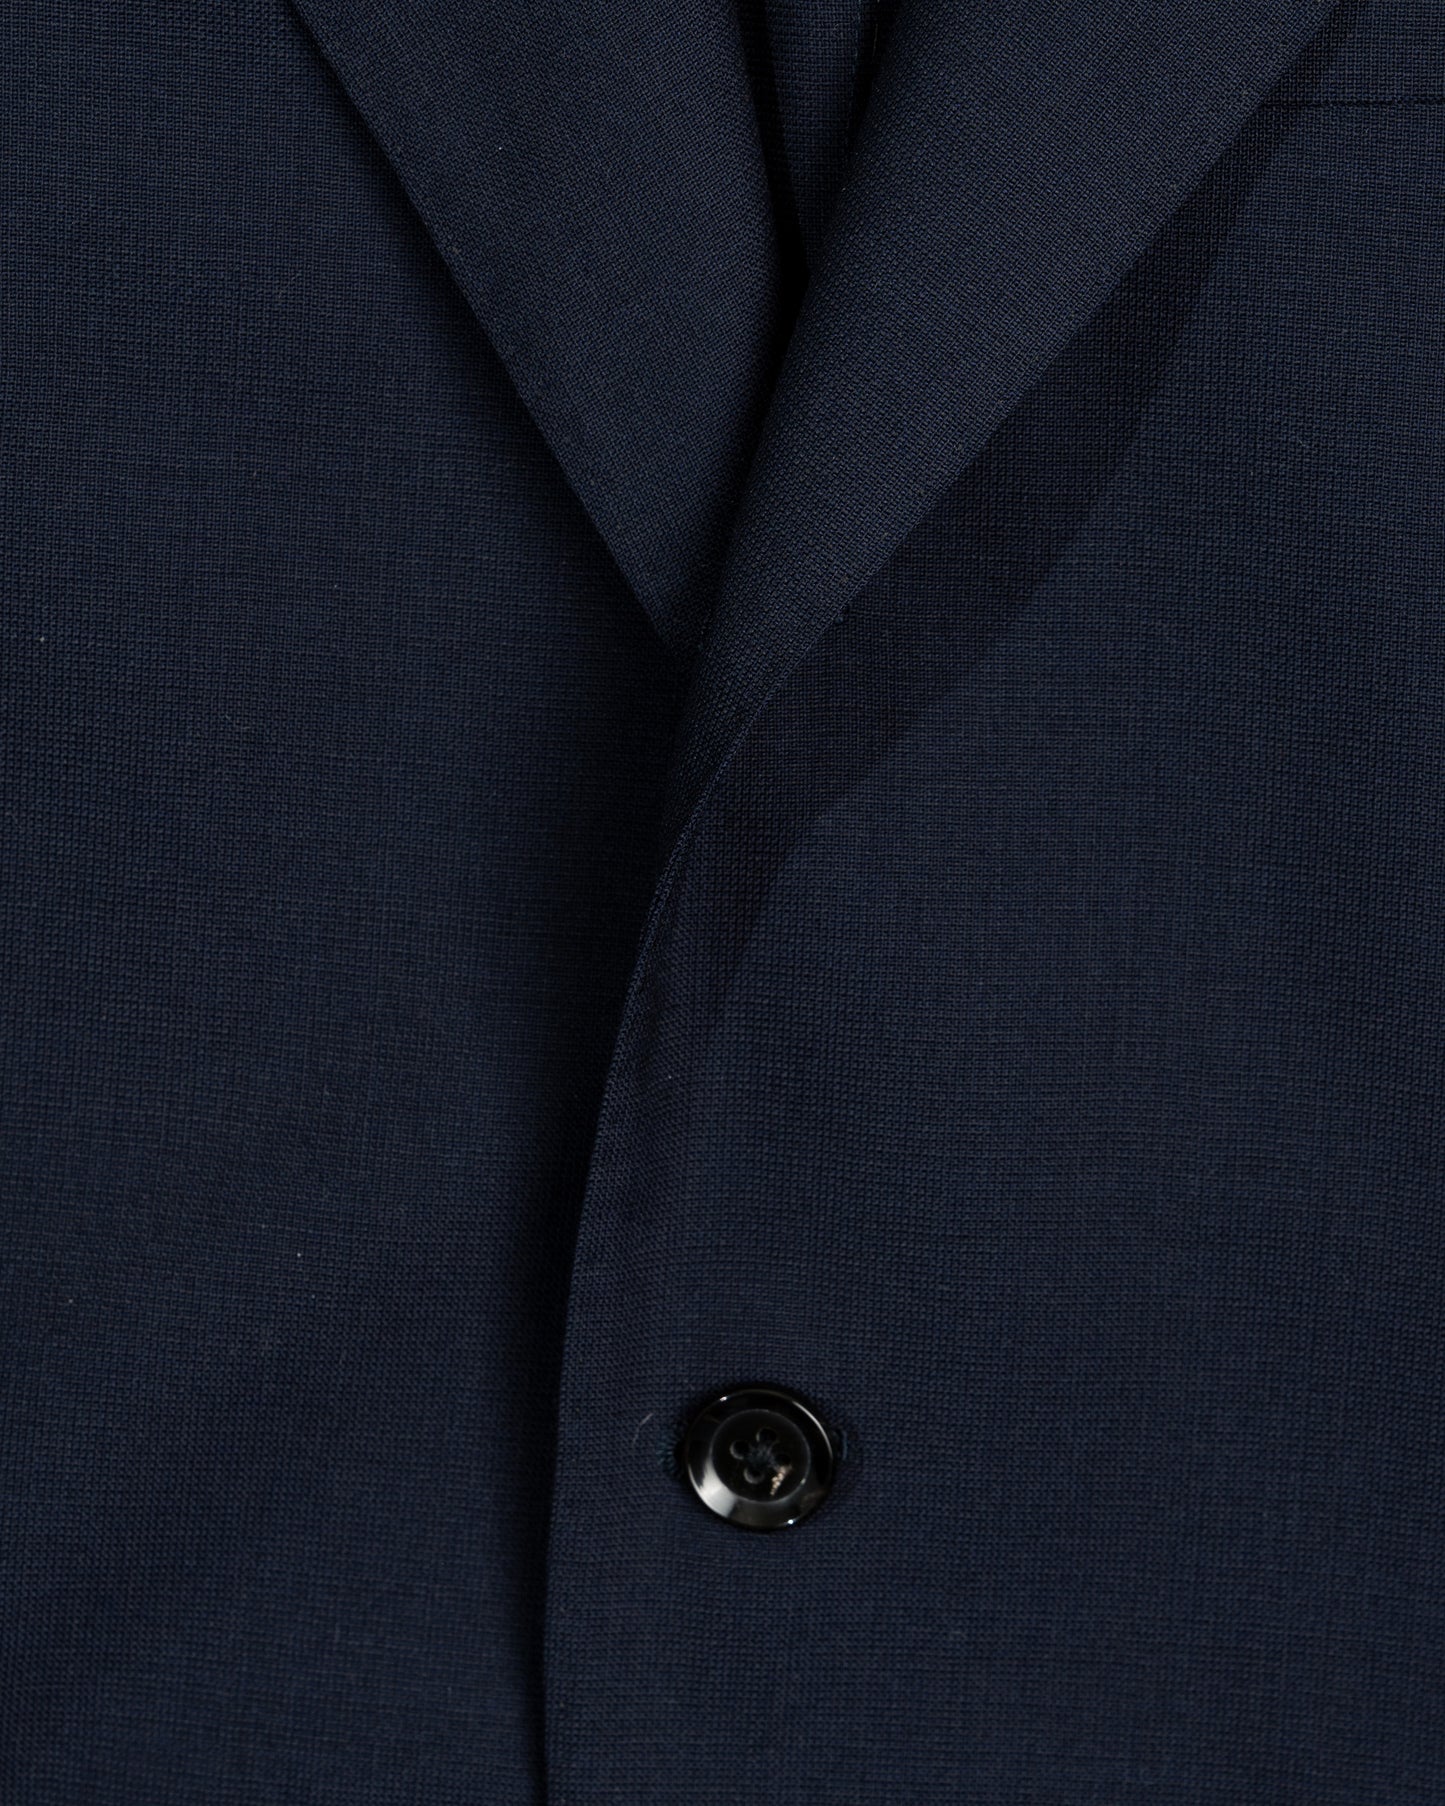 Ring Jacket Navy Suit